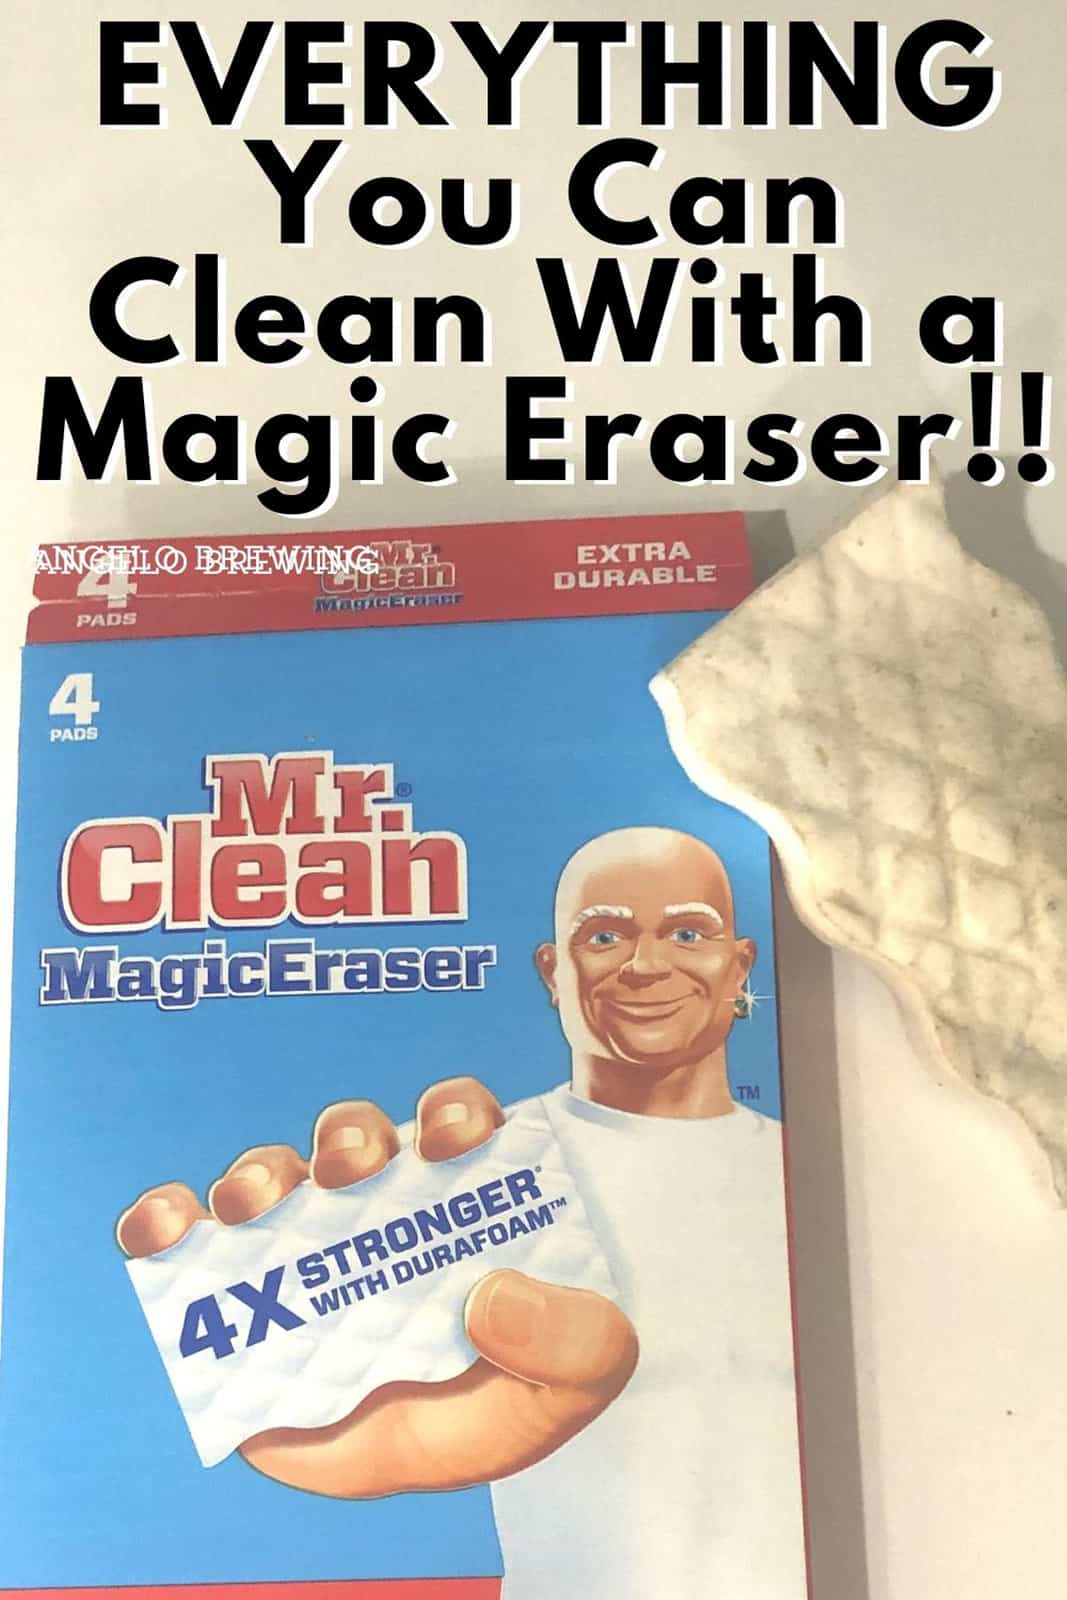 How do magic erasers get rid of stains?